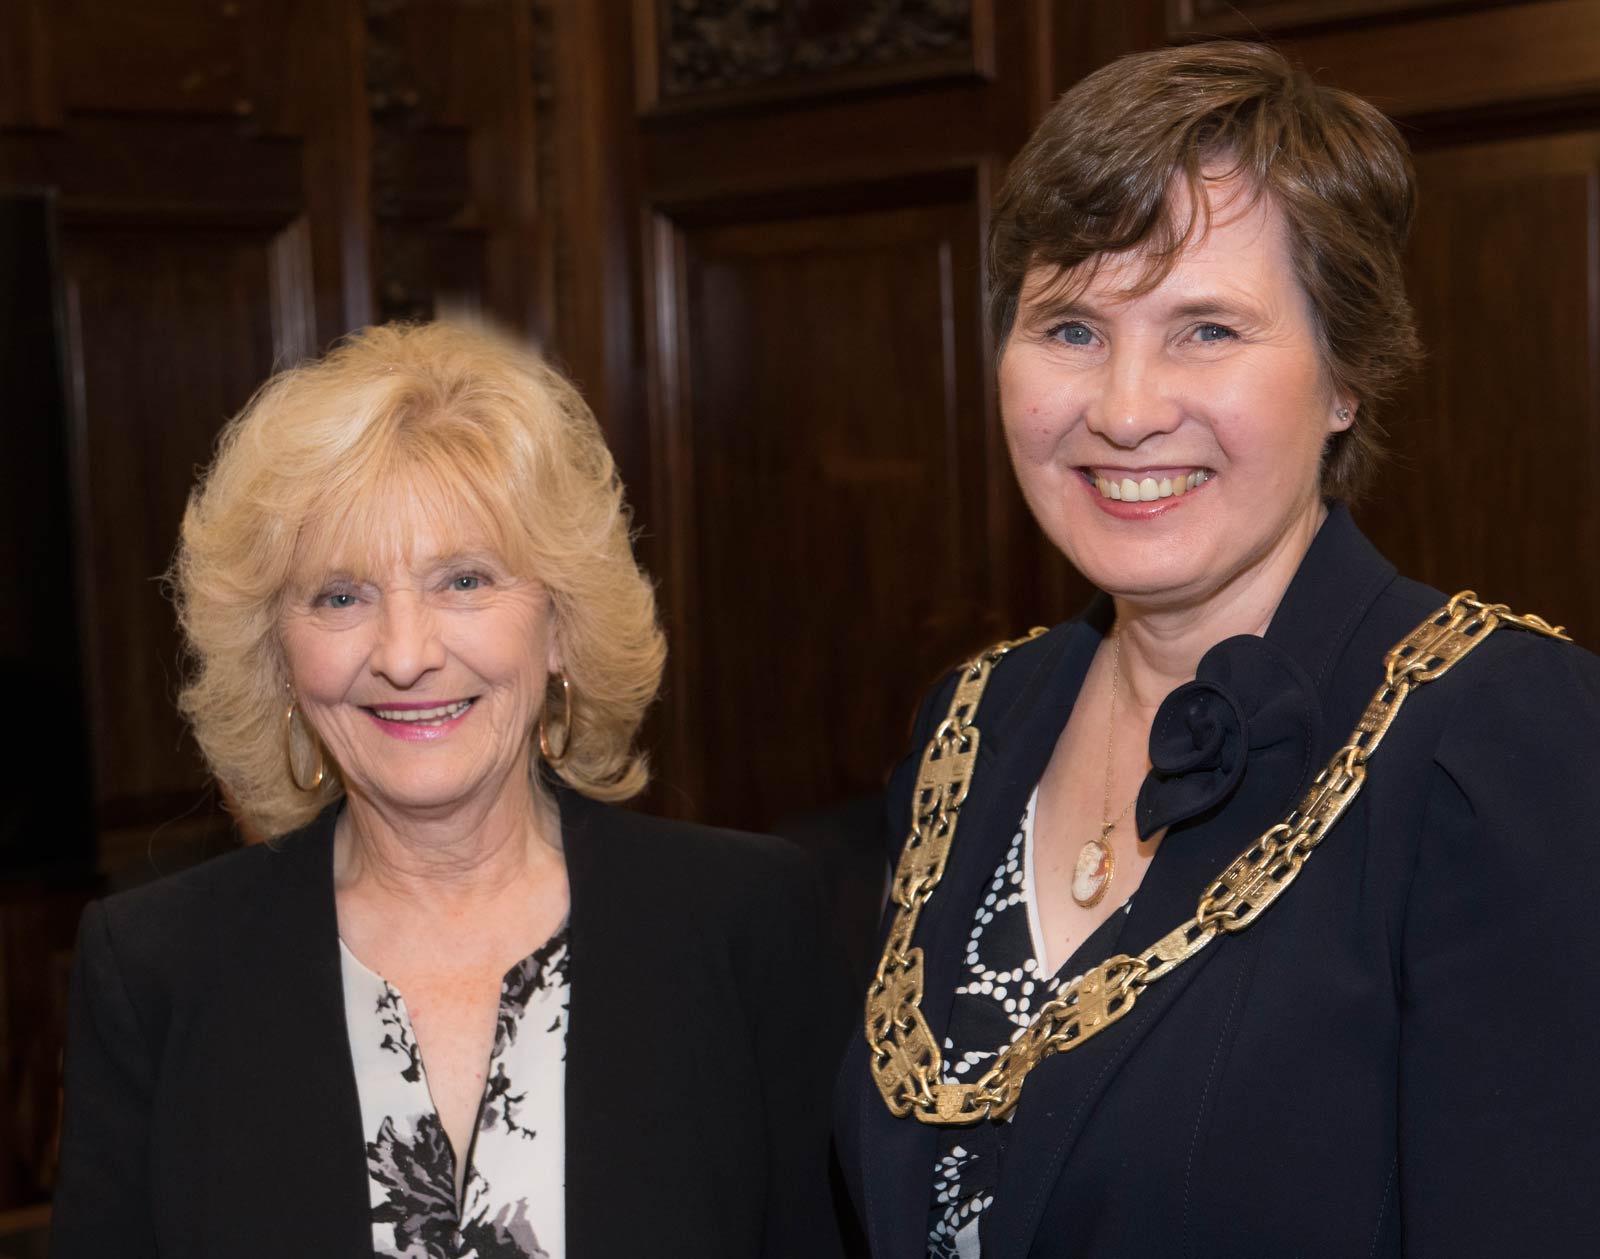 Cllr Helen Swiers, North Yorkshire County Council’s new chair (right), with the outgoing chair Cllr Val Arnold